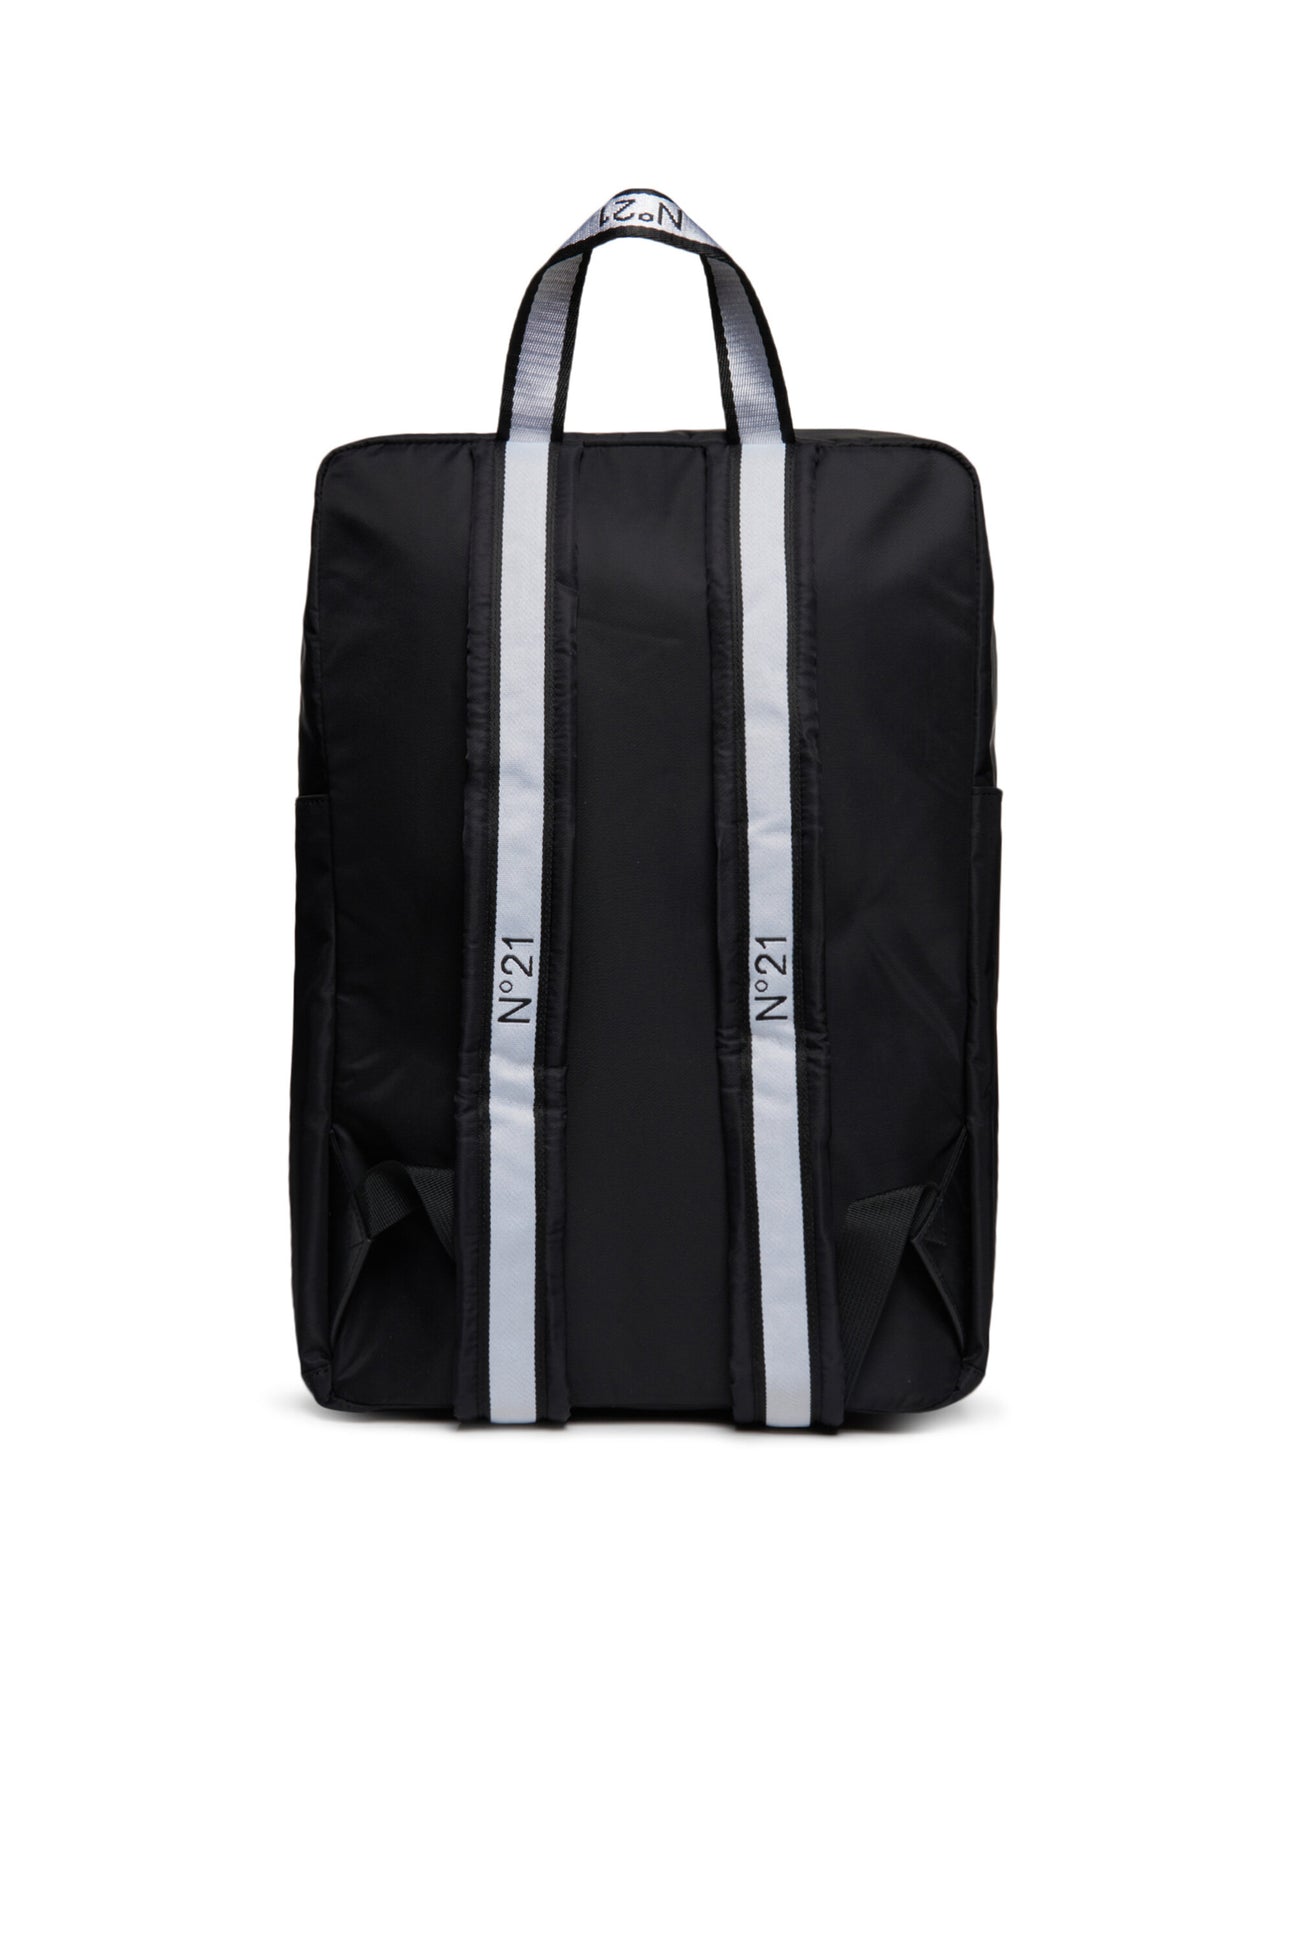 Black backpack with zip fastening and logo Black backpack with zip fastening and logo